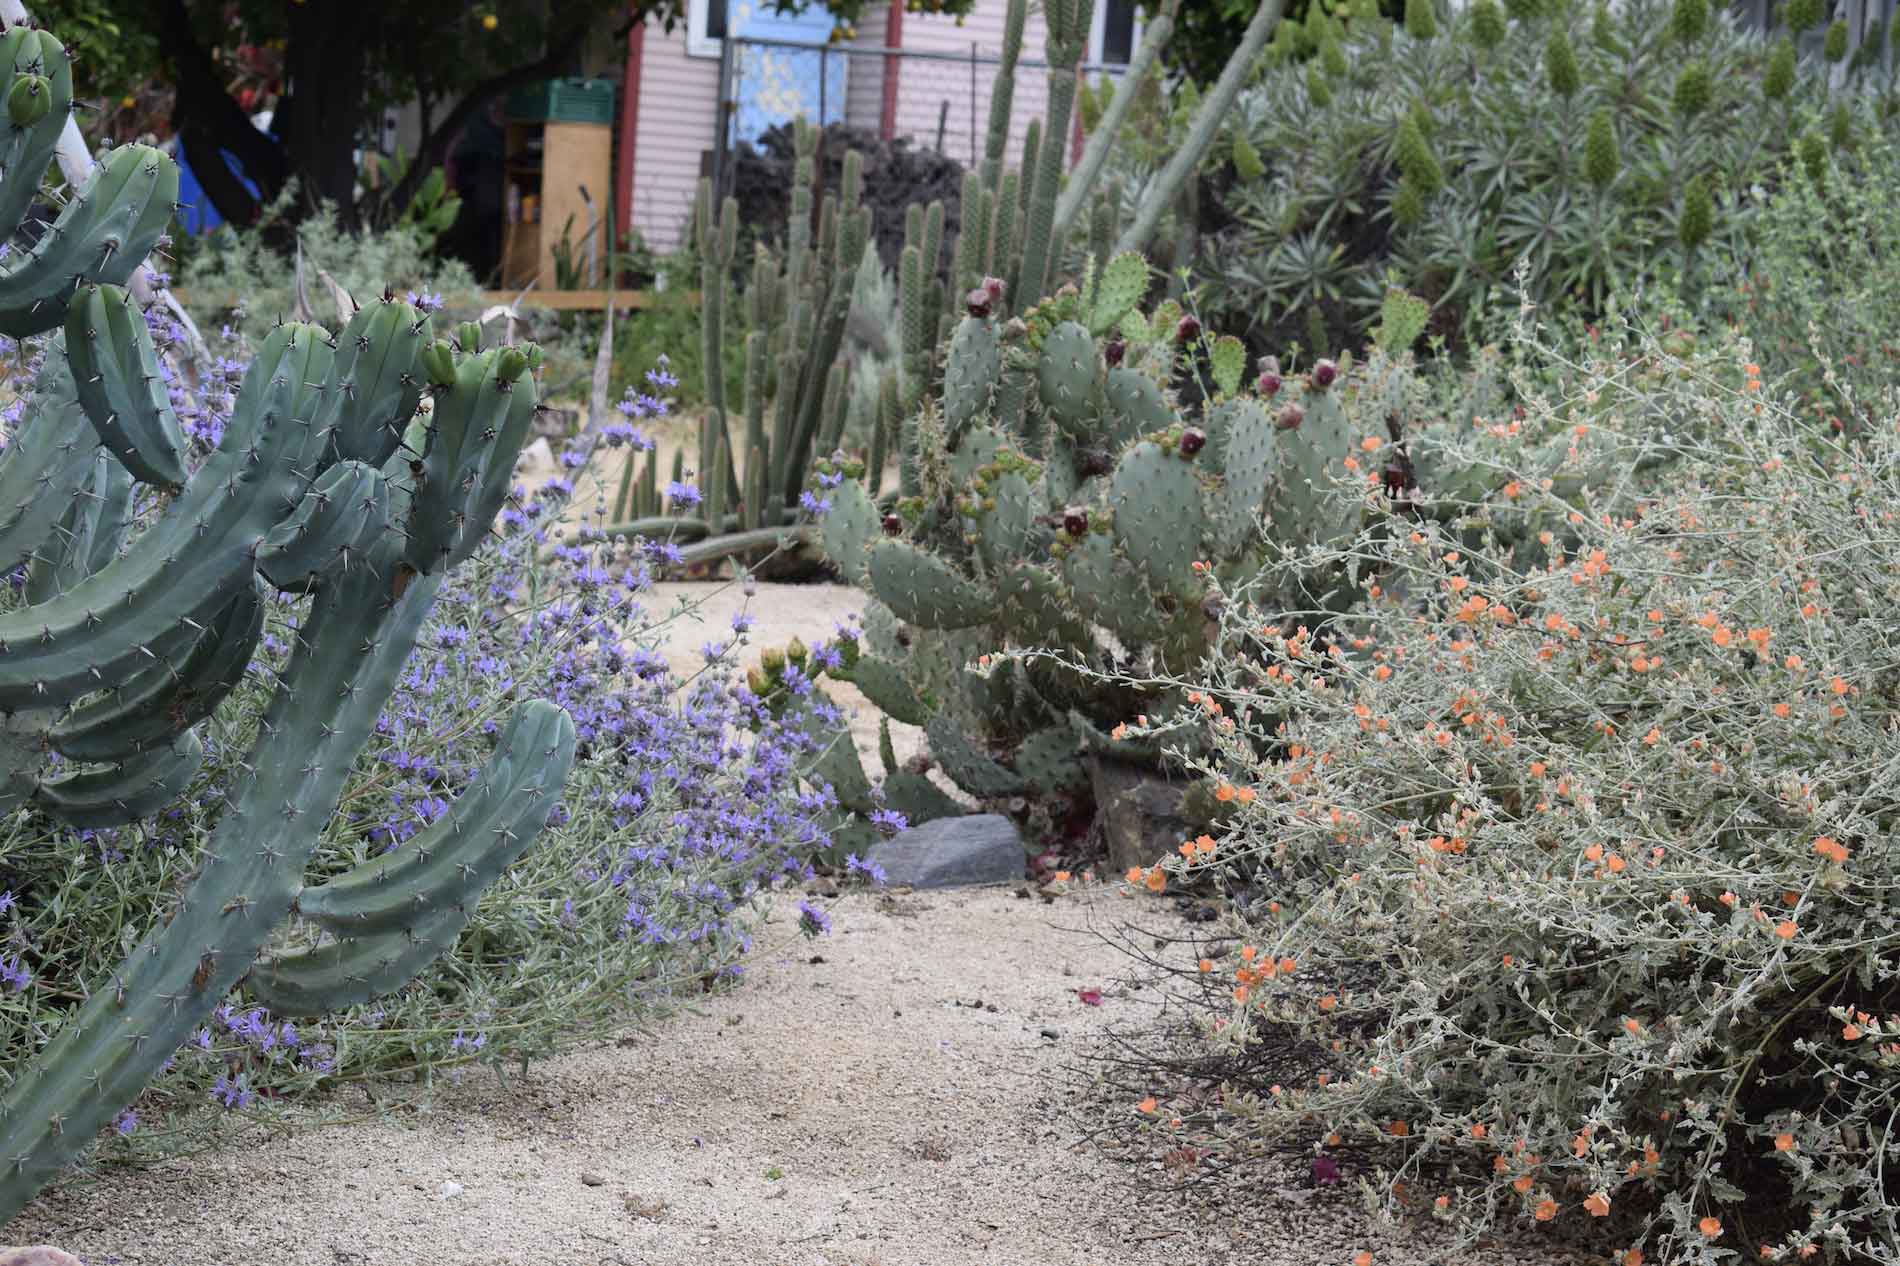 Decomposed granite mulch in garden of succulents mixed with California native and Mediterranean plants in a residential front yard in Pasadena.